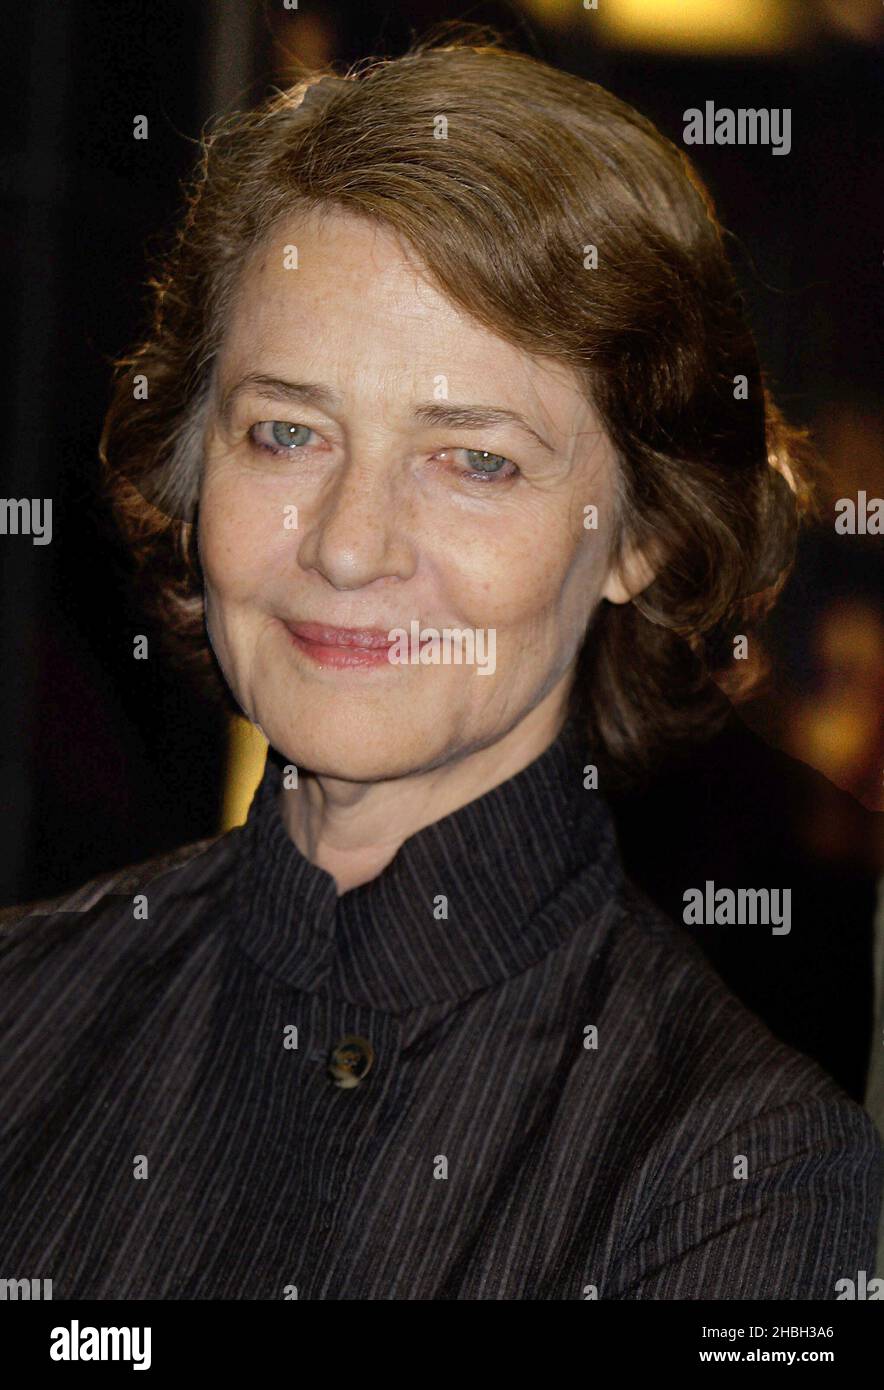 Charlotte Rampling arriving at the 56th BFI London Film Festival of I, Anna Premiere at Curzon's Mayfair in London. Stock Photo